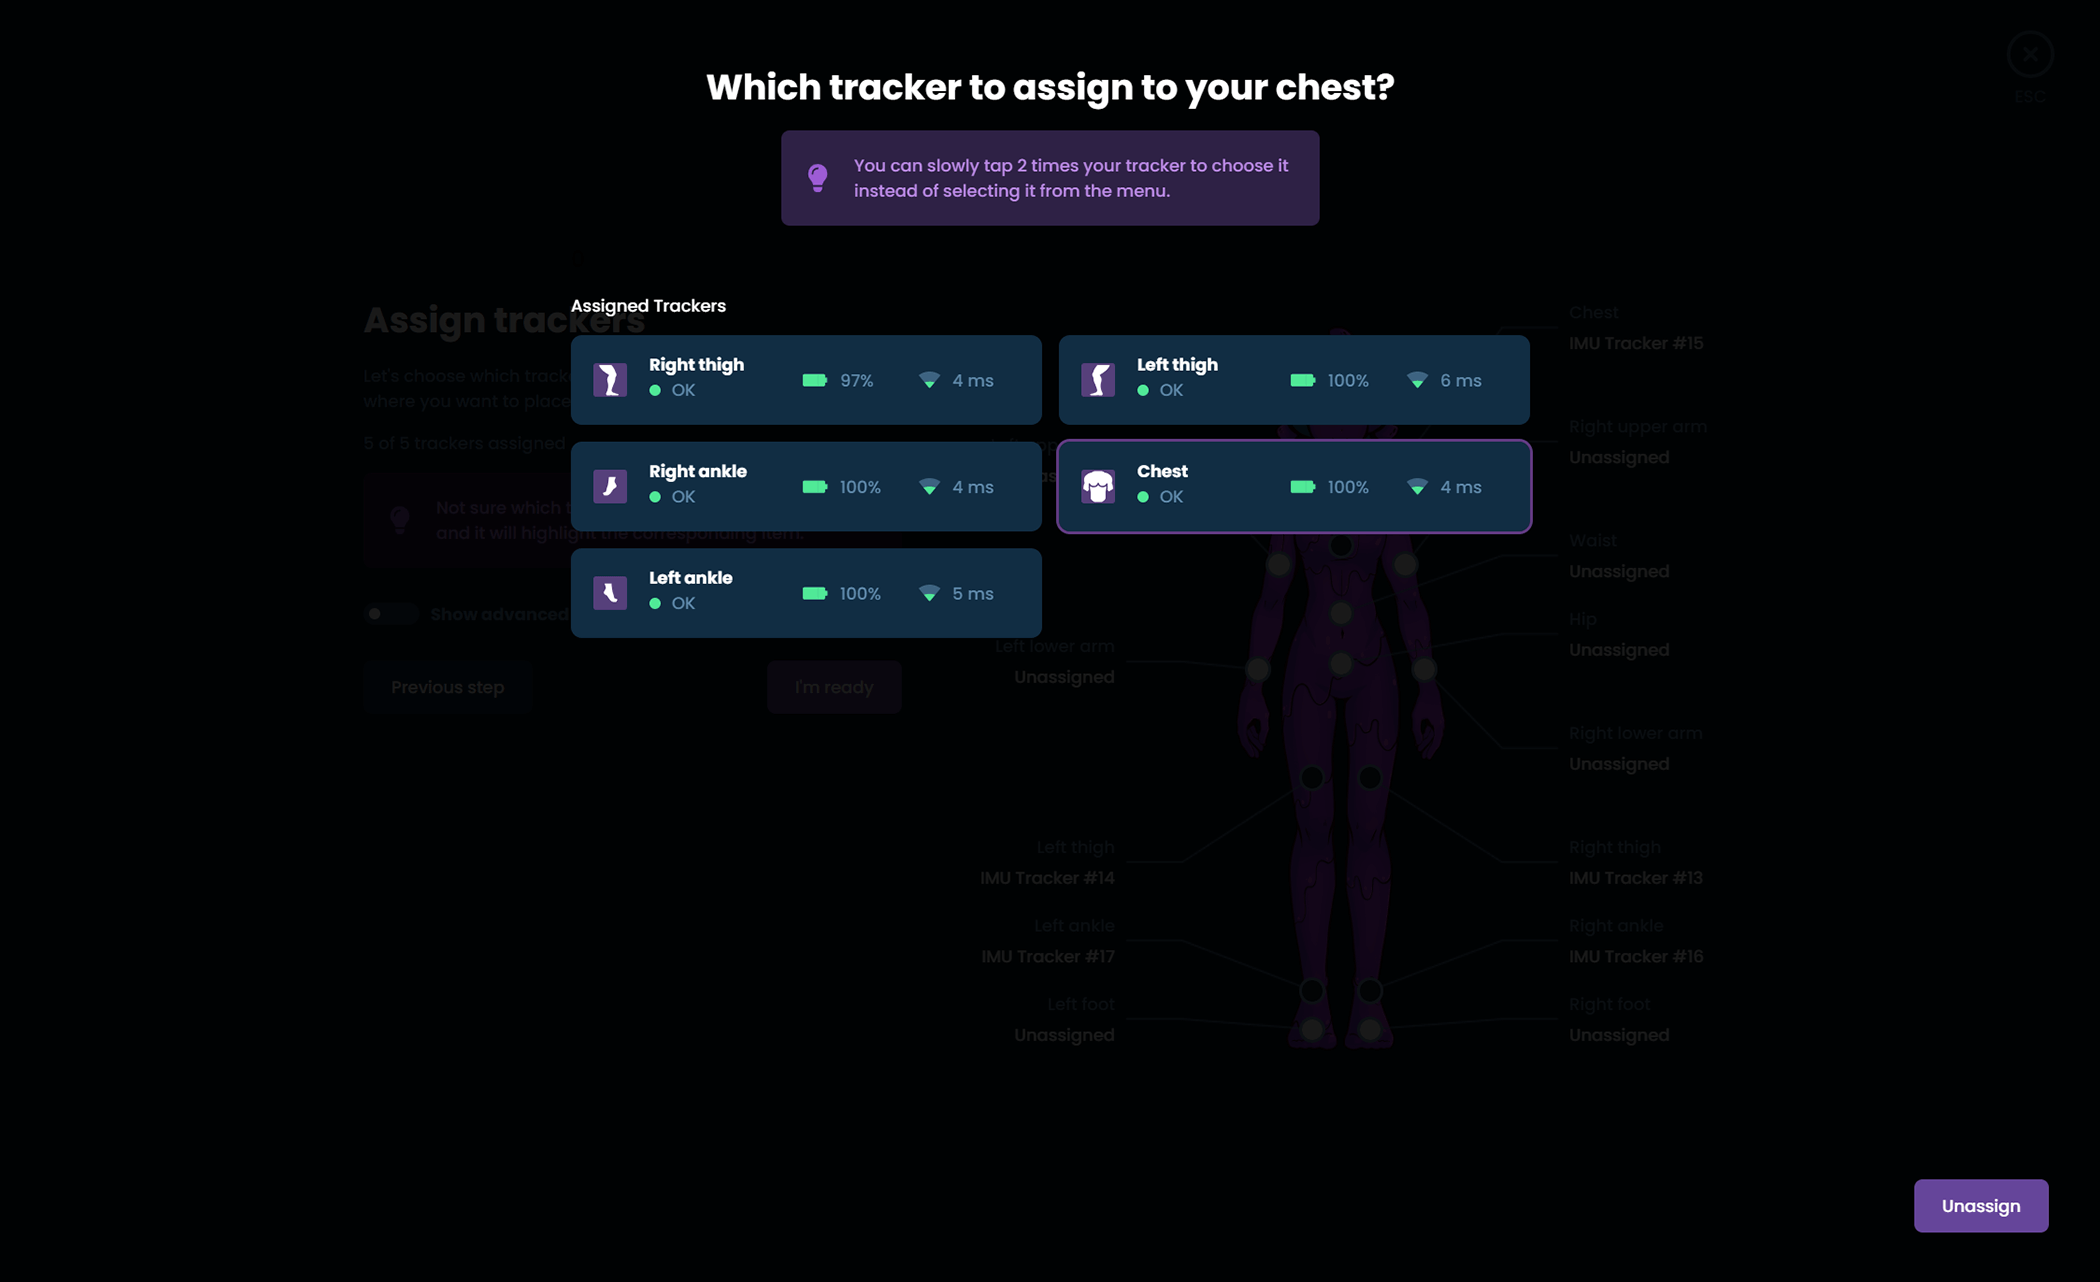 Tracker list pop up for choosing the right tracker